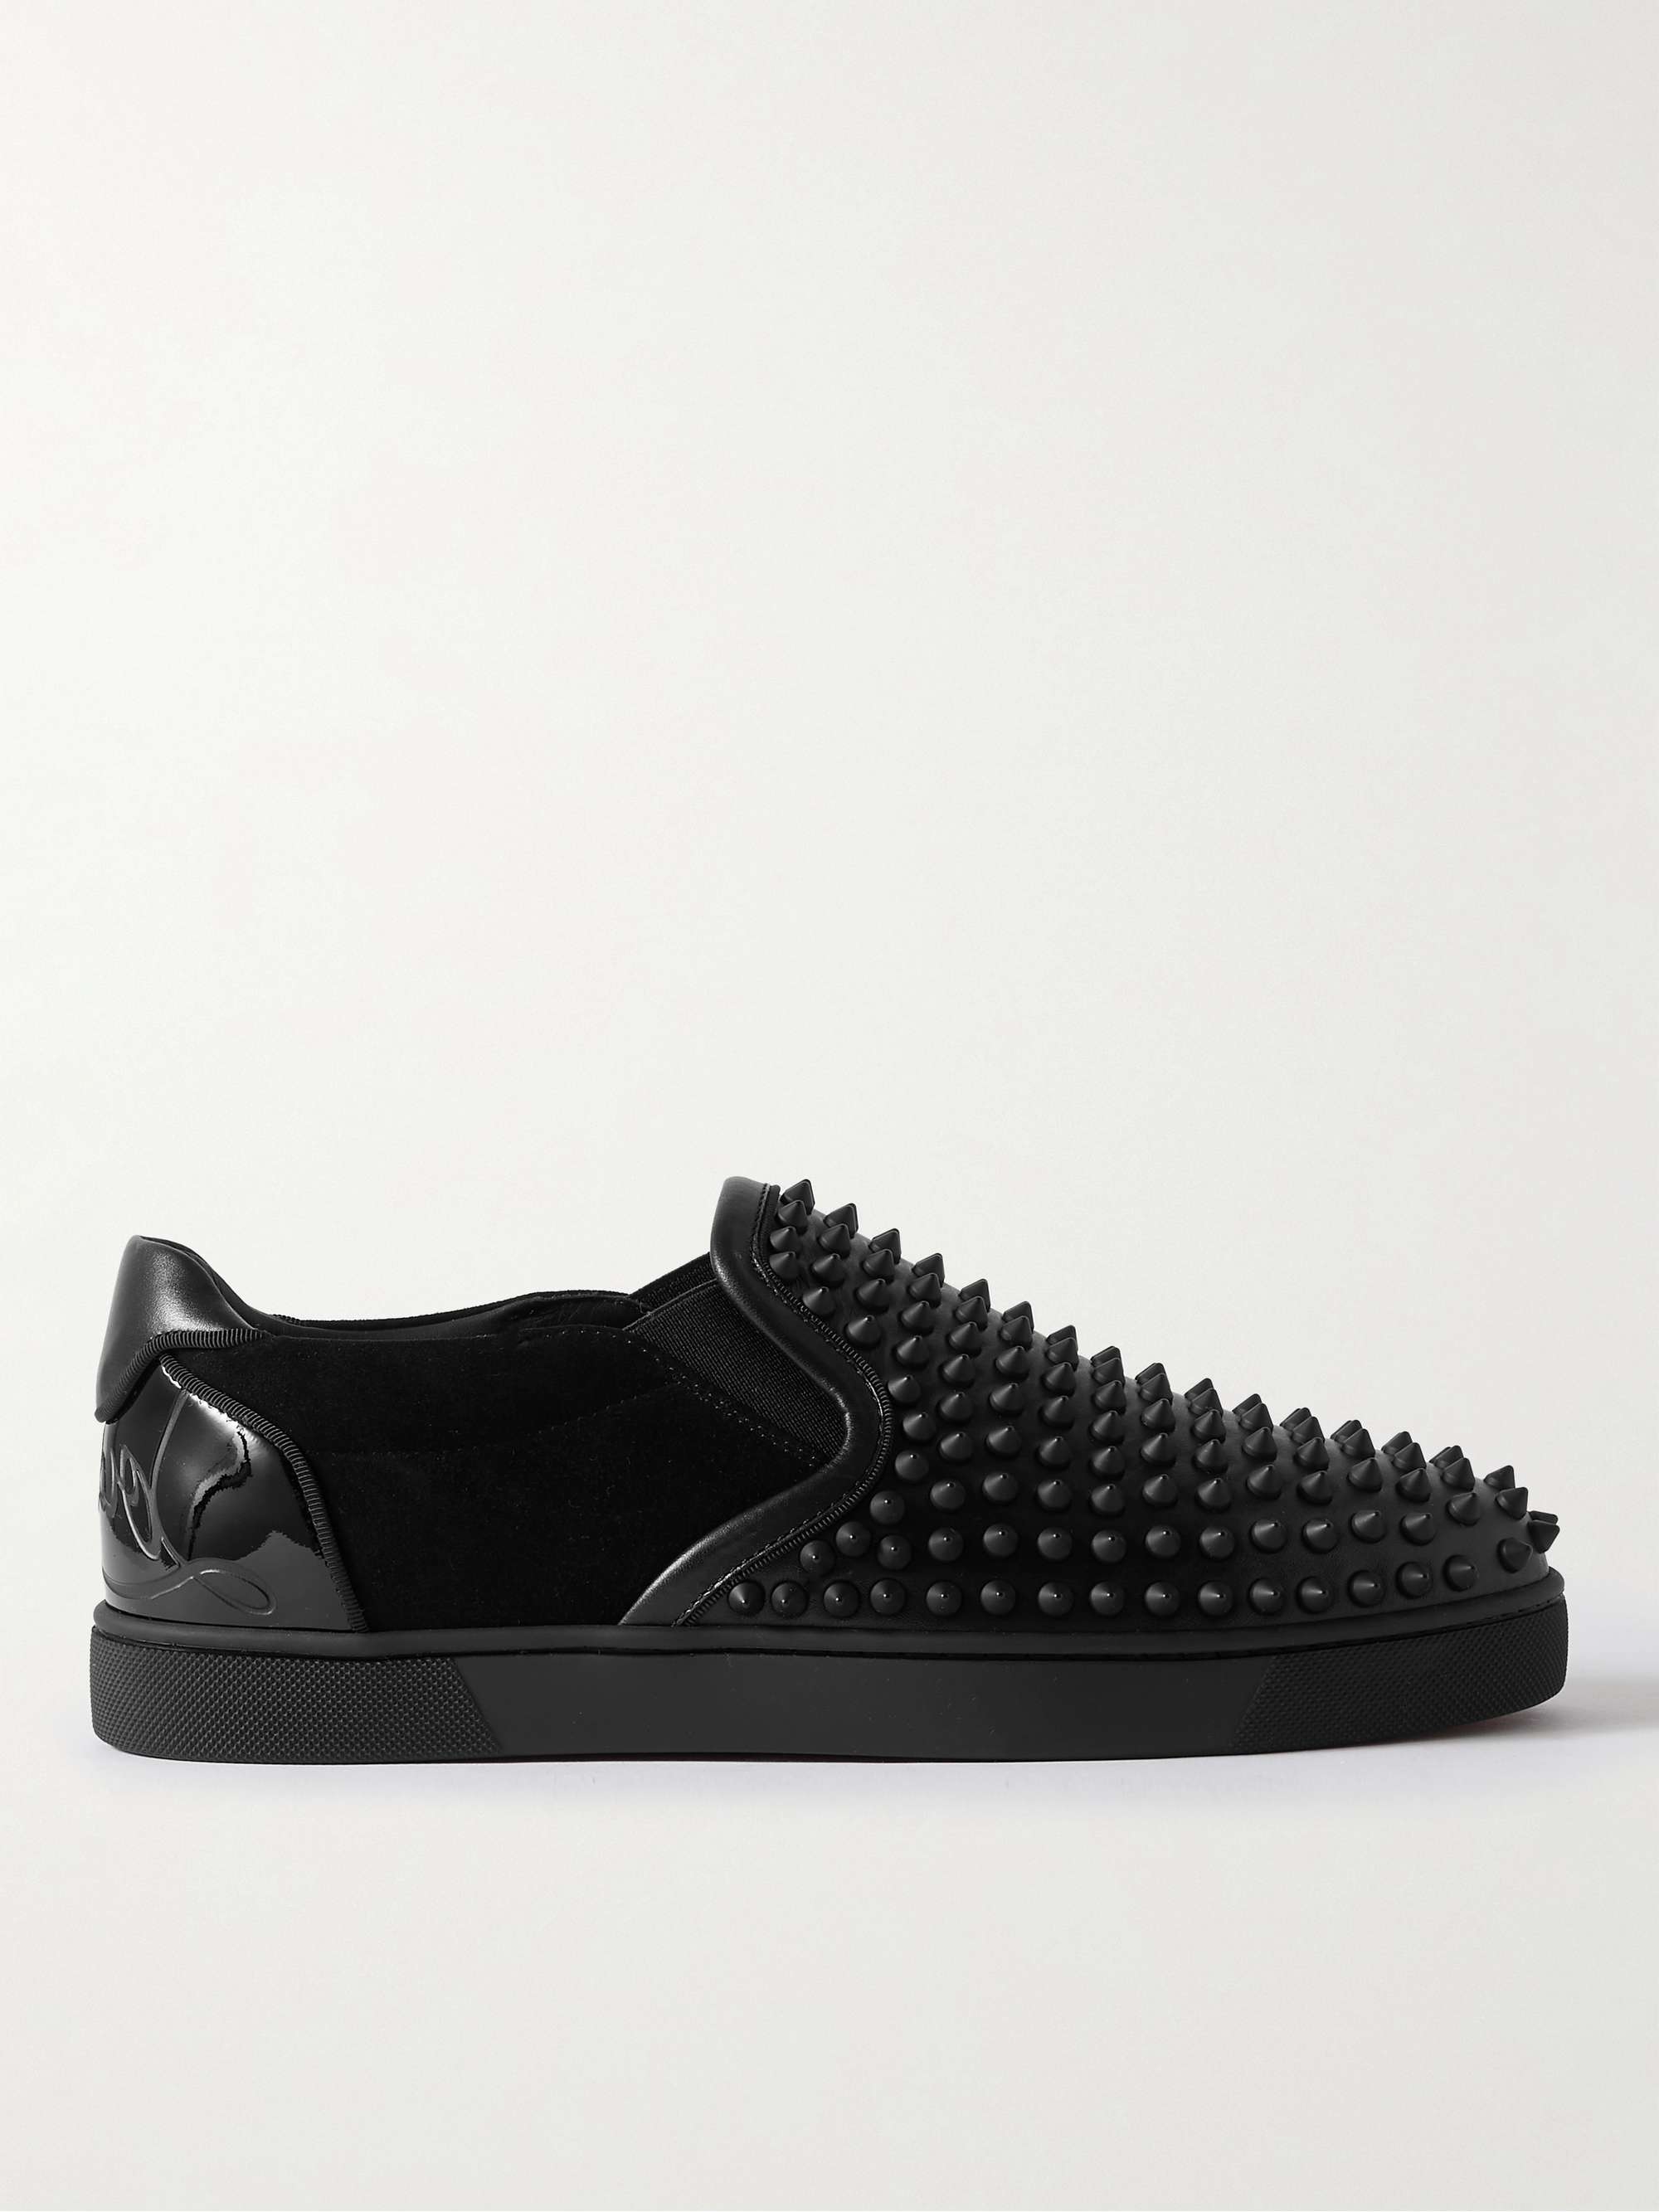 Fun Sailor Studded Leather and Suede Slip-On Sneakers